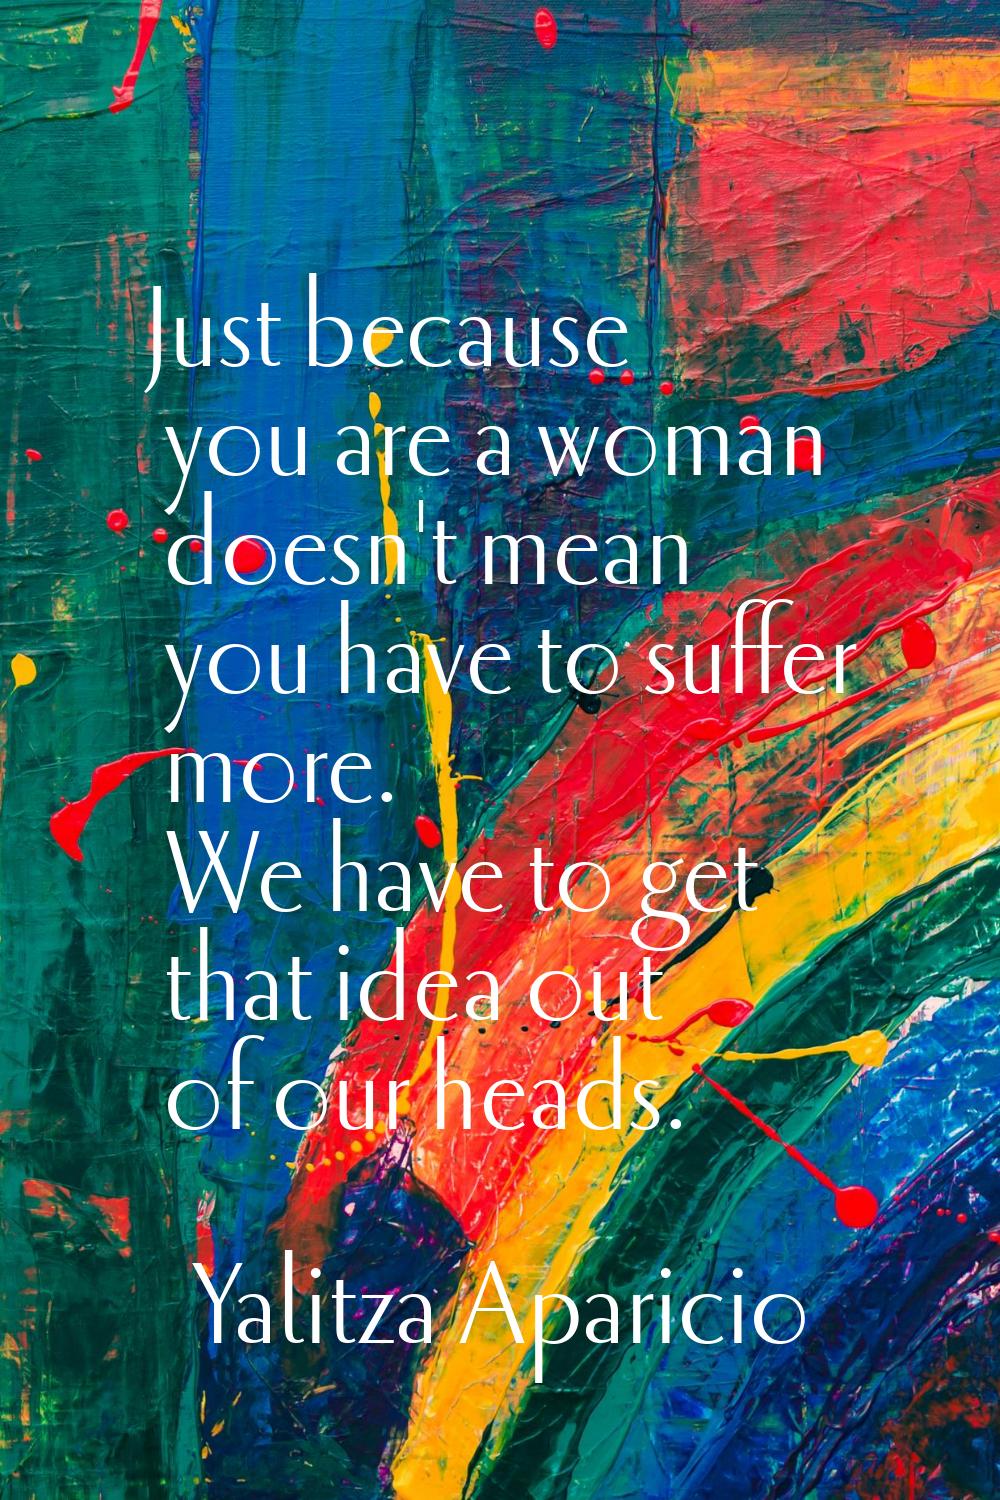 Just because you are a woman doesn't mean you have to suffer more. We have to get that idea out of 